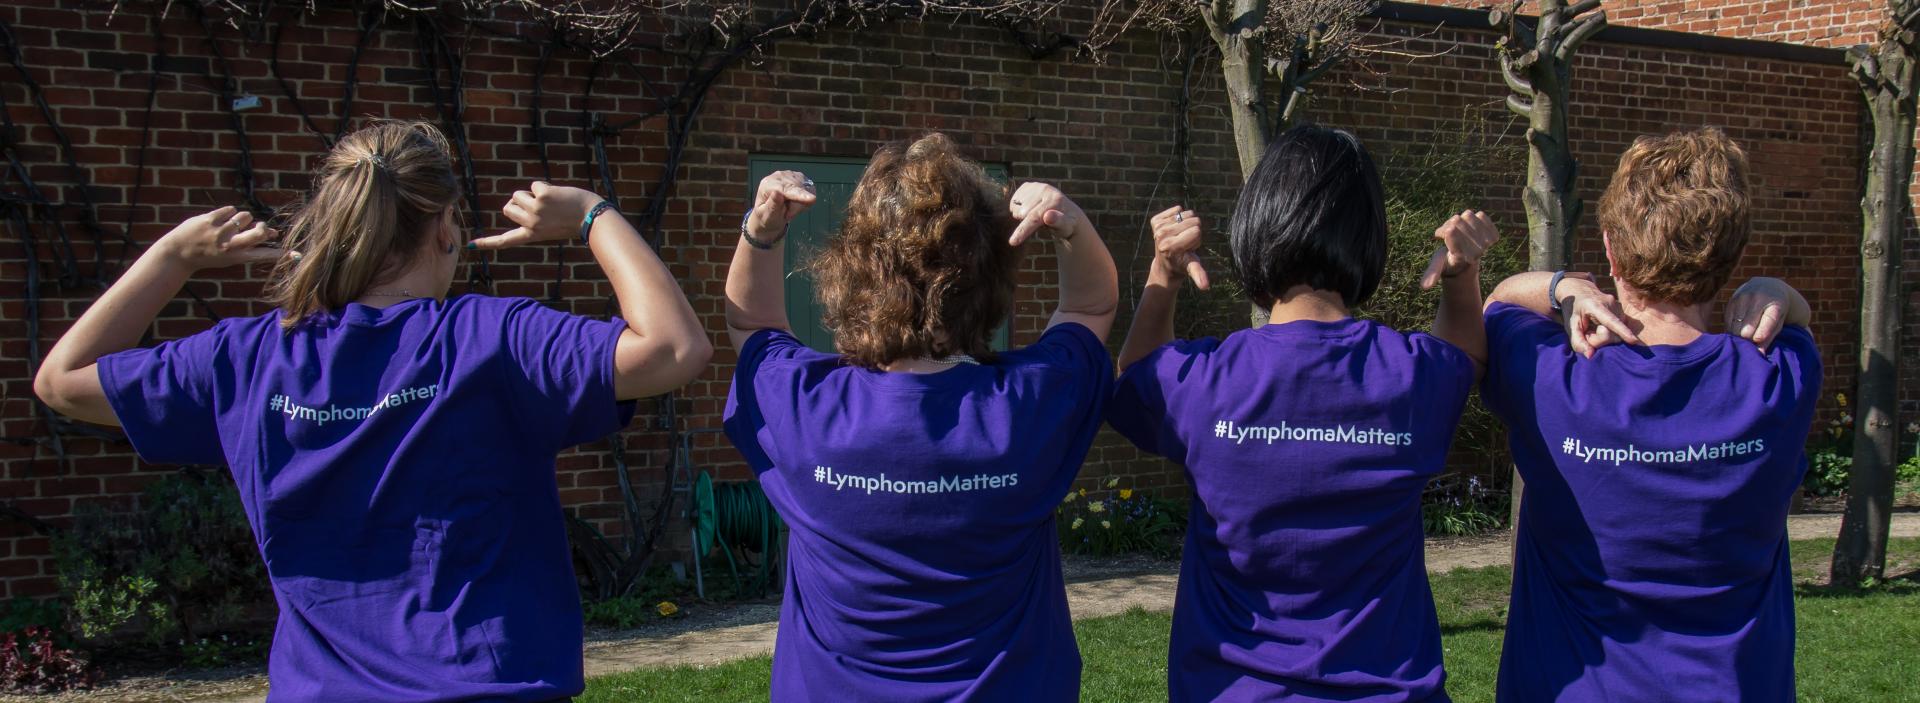 Four people in purple shirts with Lymphoma Matters written on the back